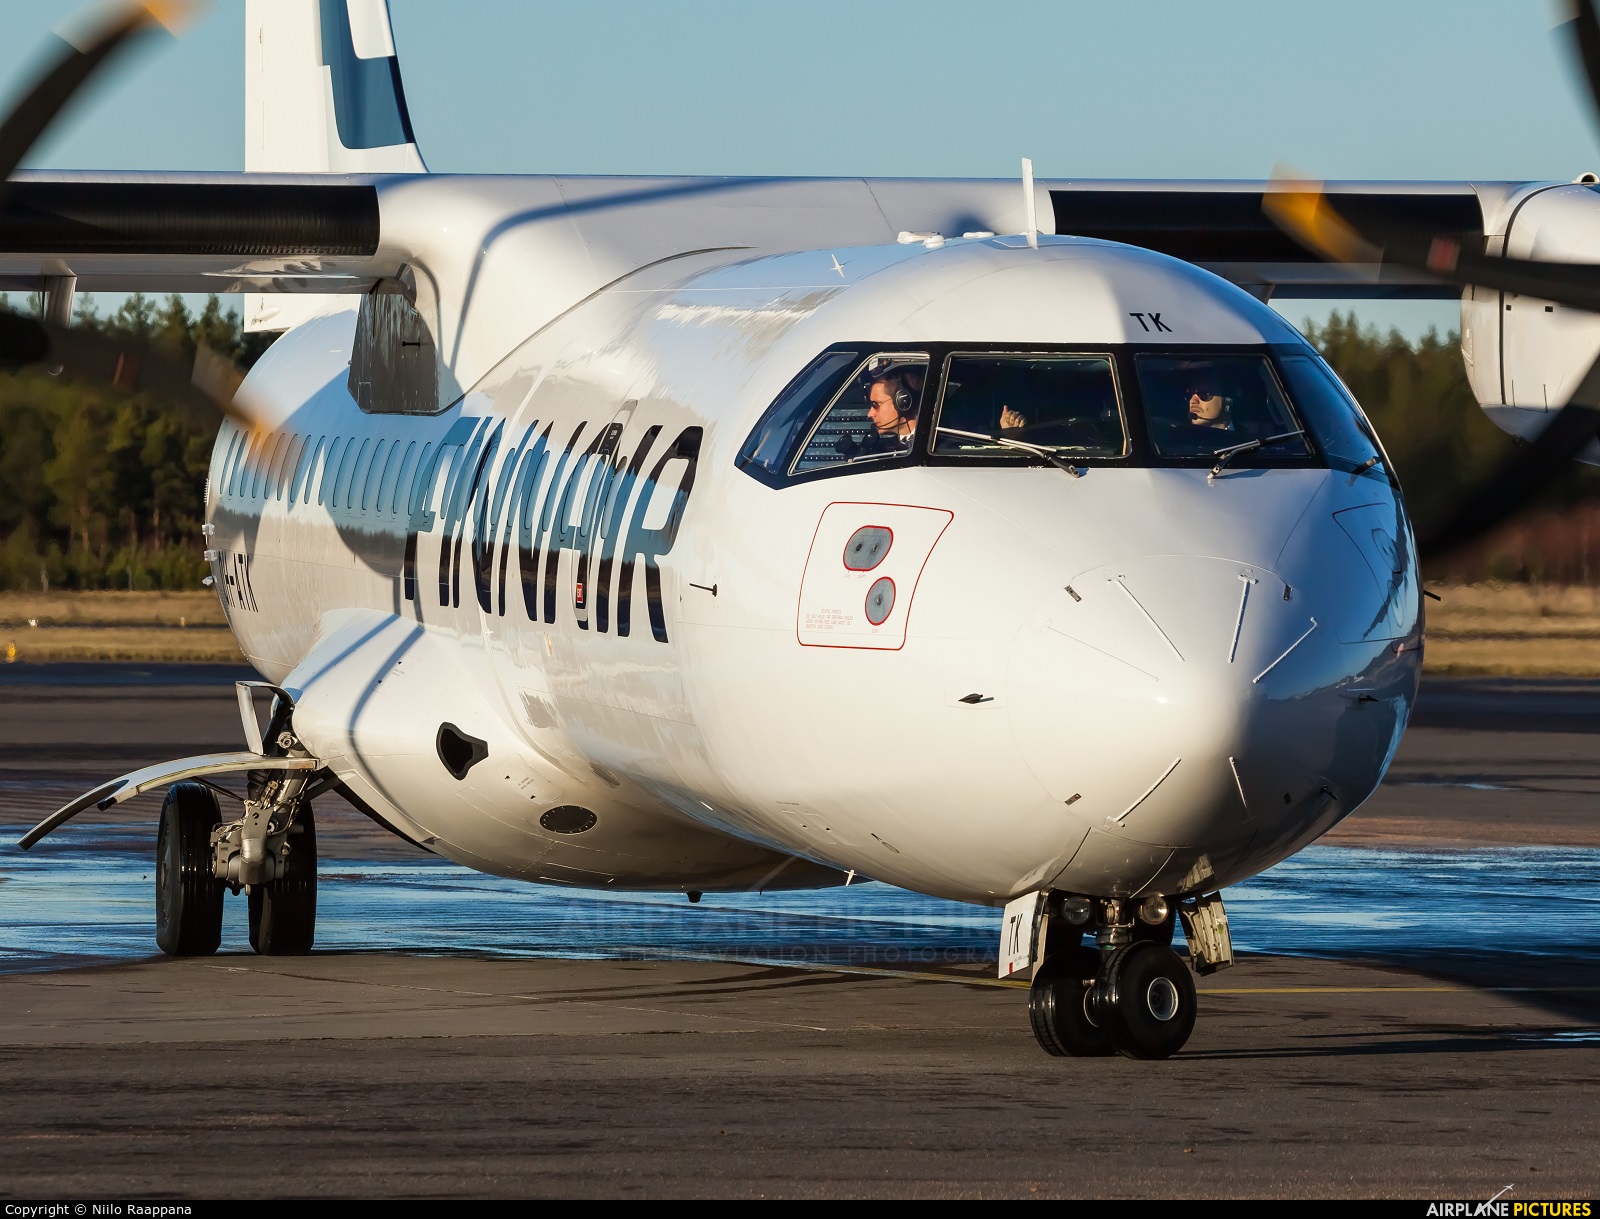 NoRRA - Nordic Regional Airlines OH-ATK aircraft at Turku